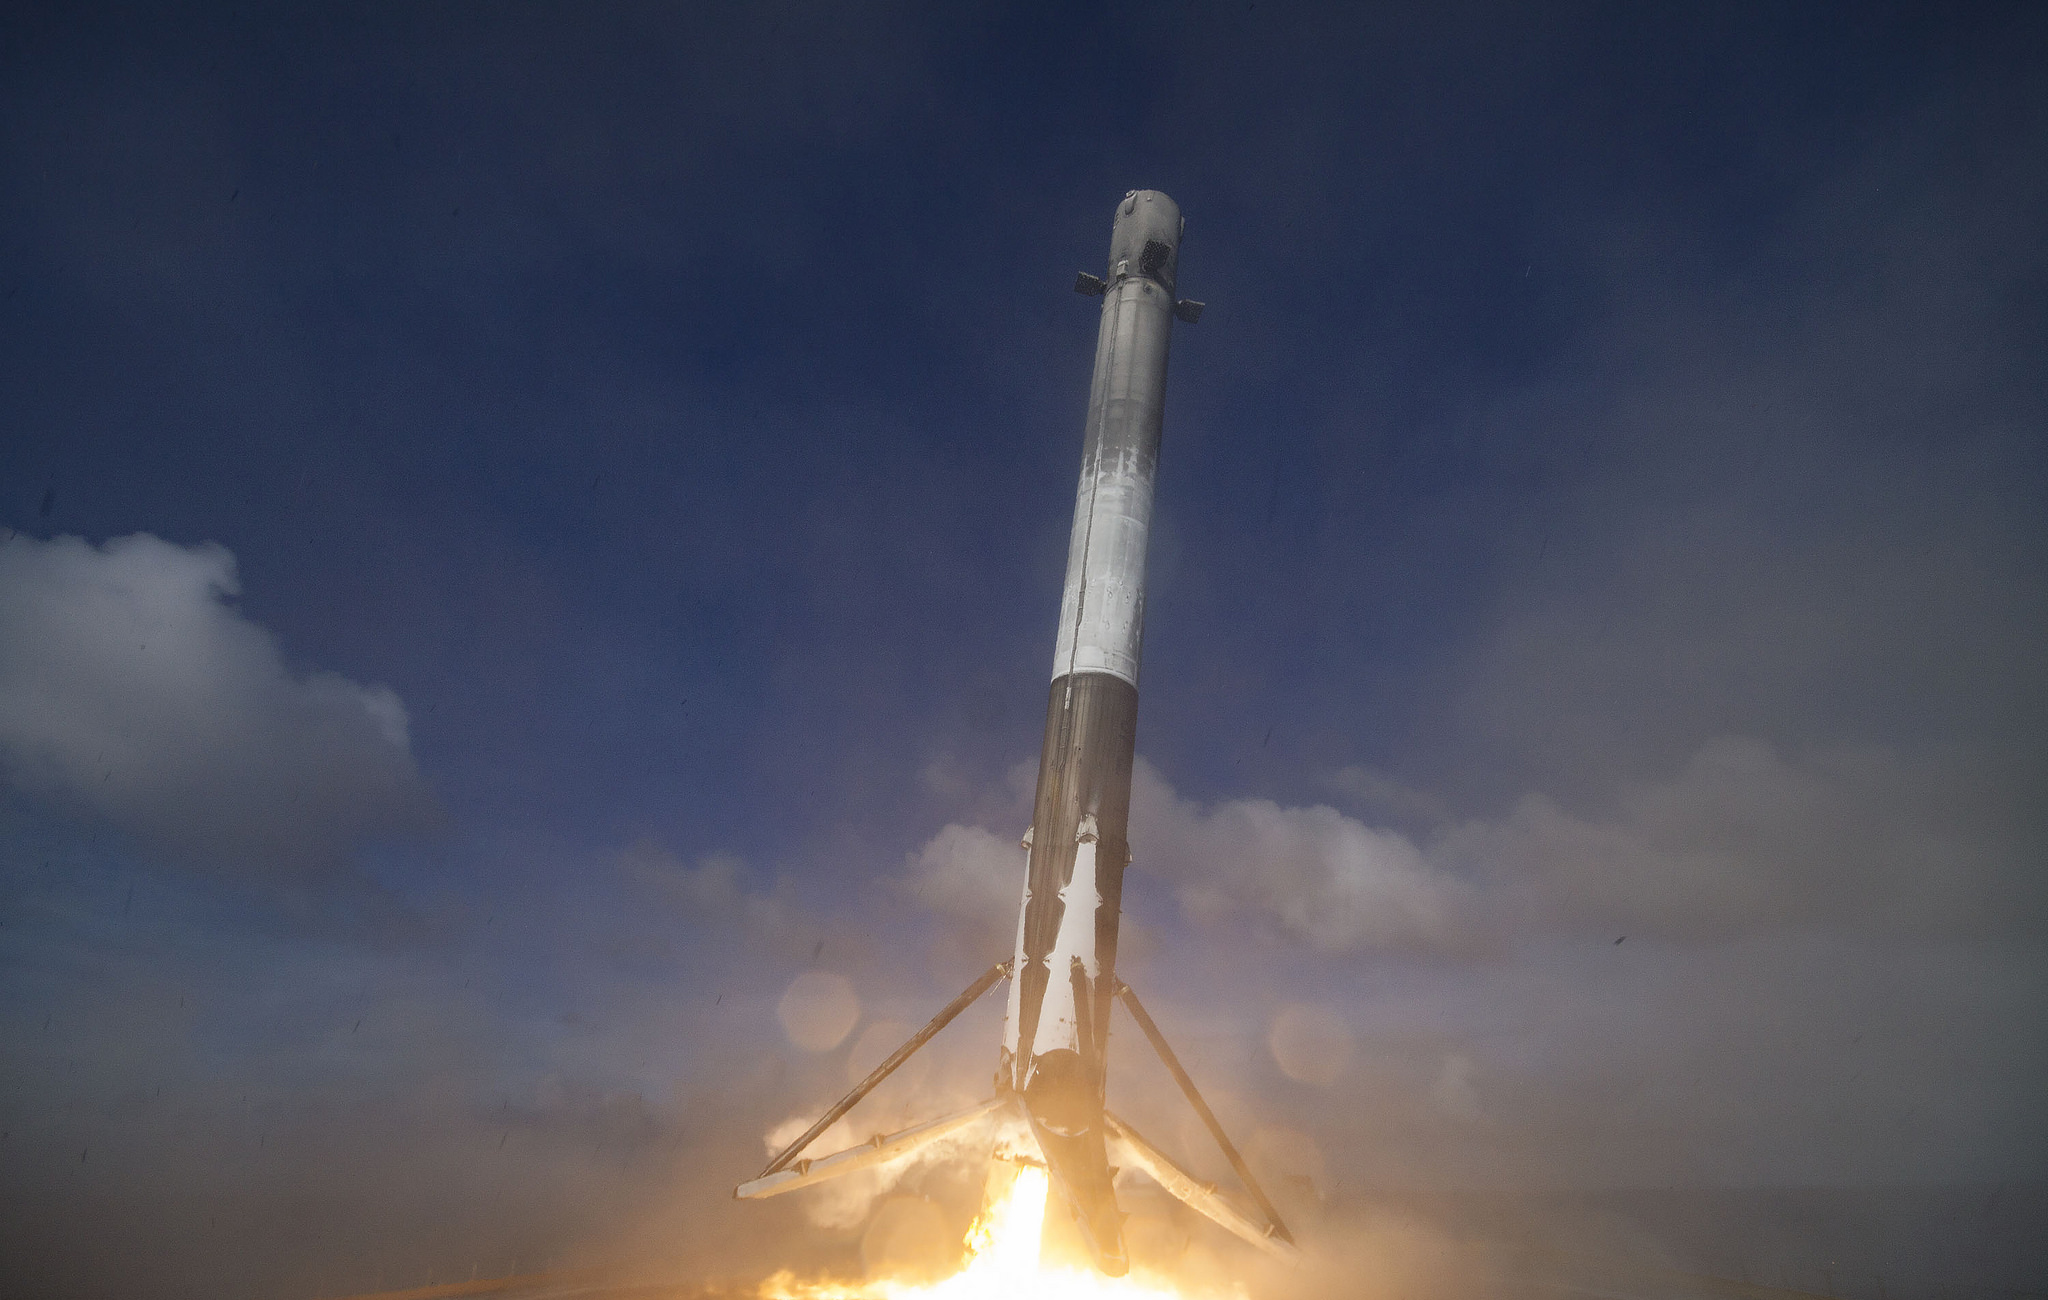 Watch a Replay of SpaceX’s First Successful Rocket Launch Since the September Explosion